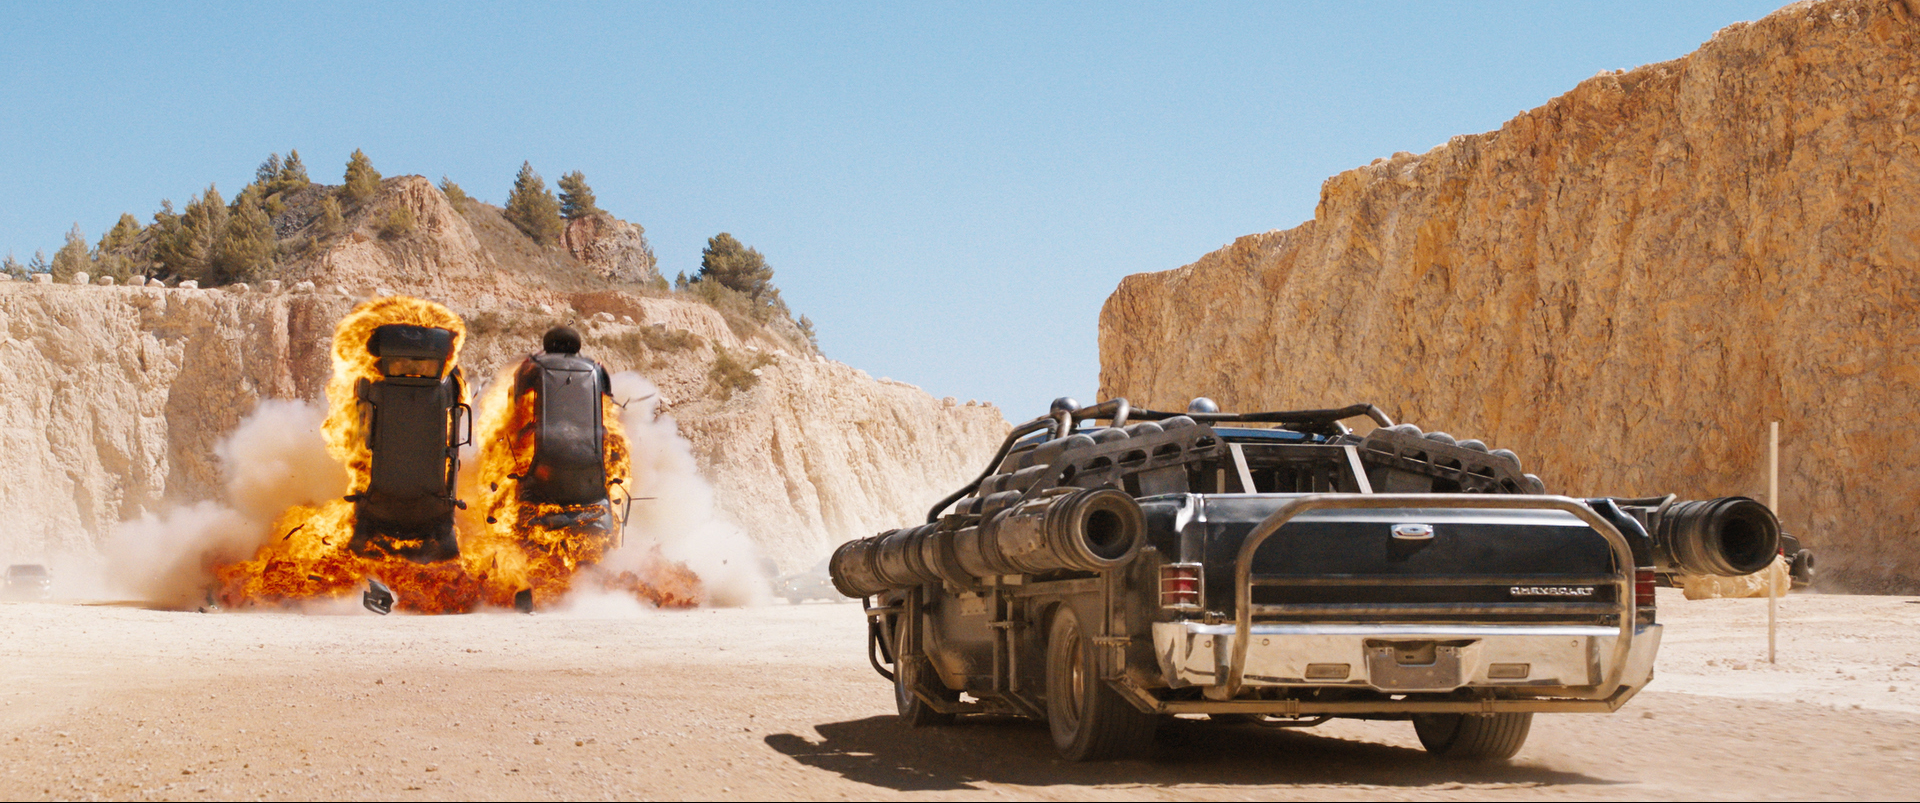 A souped up car sits in a dusty sandstone-lined landscape with two other cars burning mid-air in the distance.